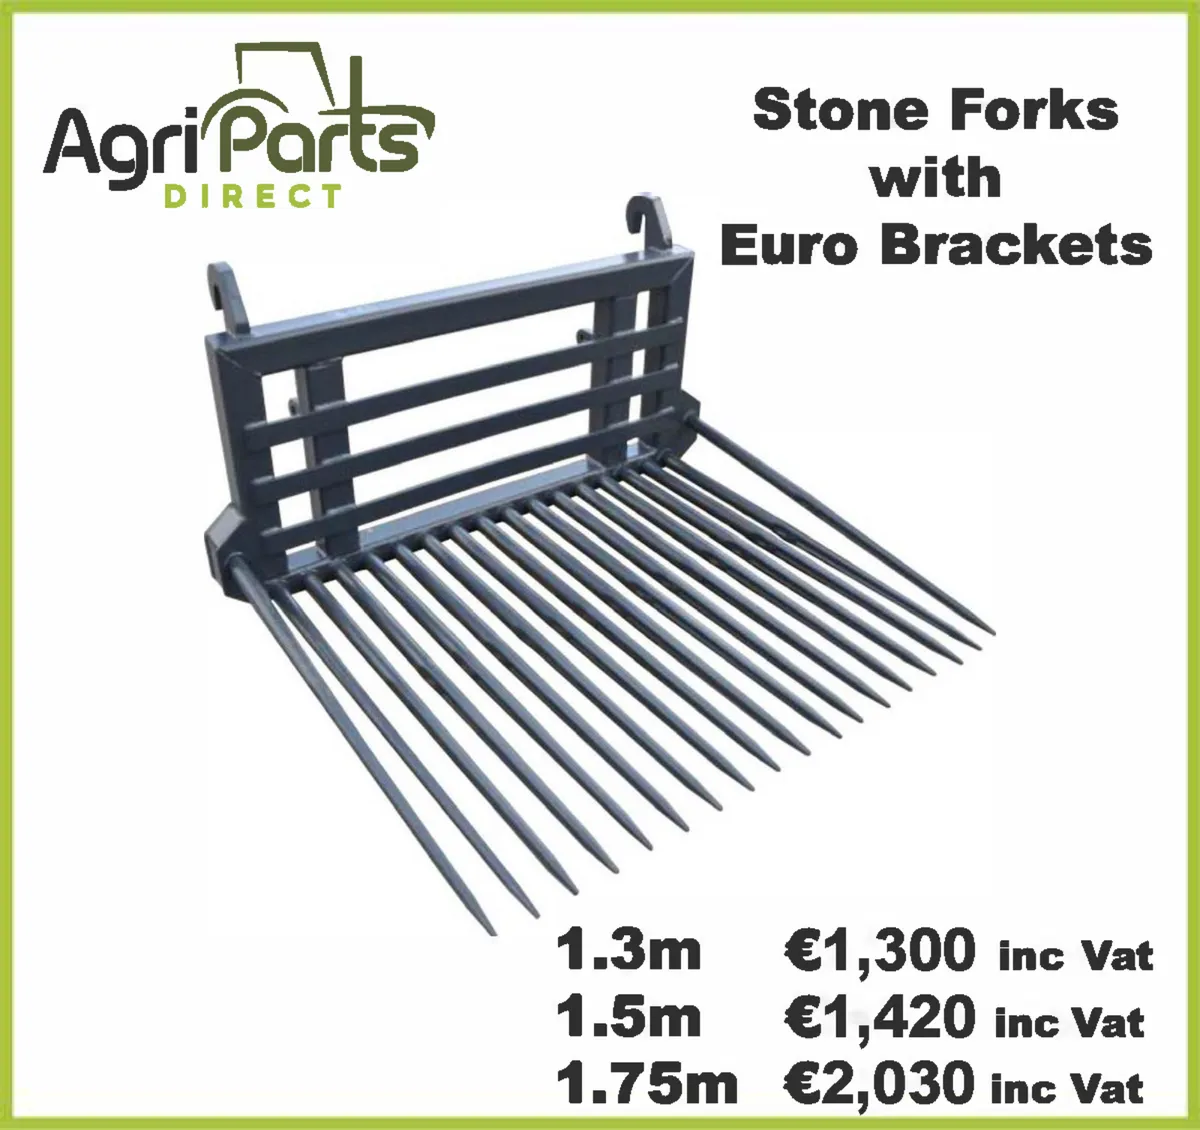 New Stone Forks CLEARANCE SALE  ALL STOCK MUST GO!